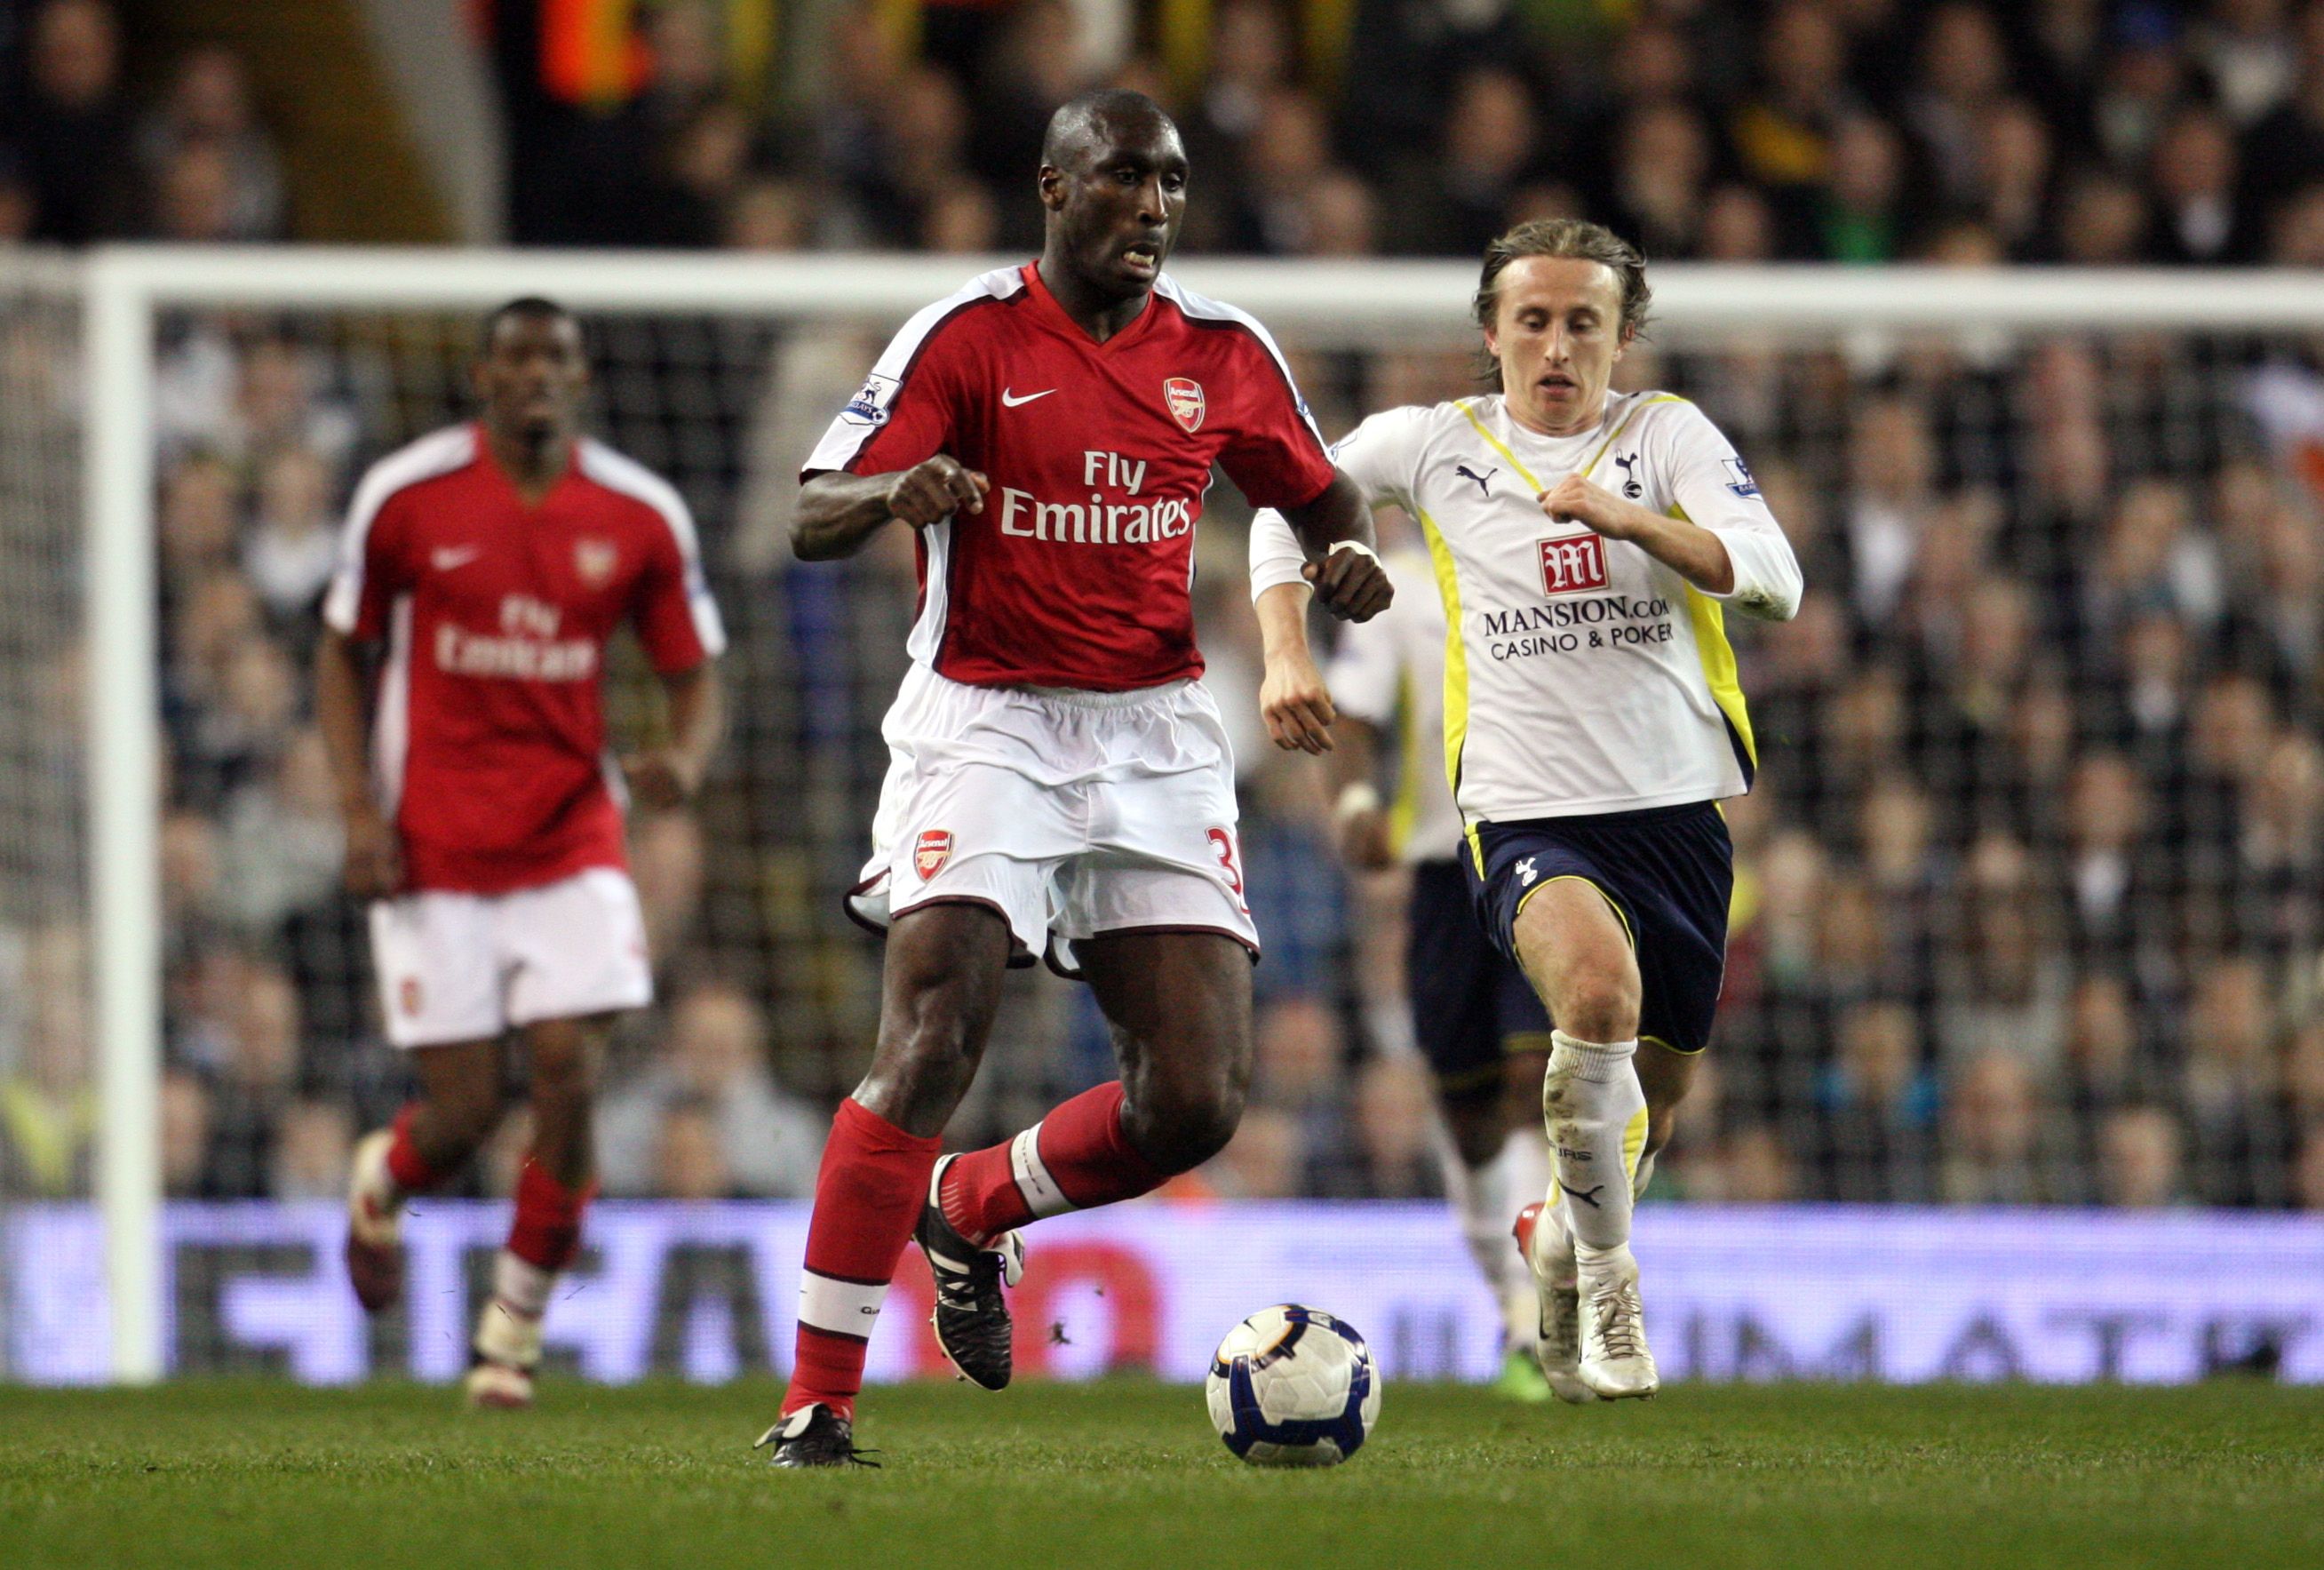 Sol Campbell - Arsenal in action against Luka Modric - Tottenham Hotspur 